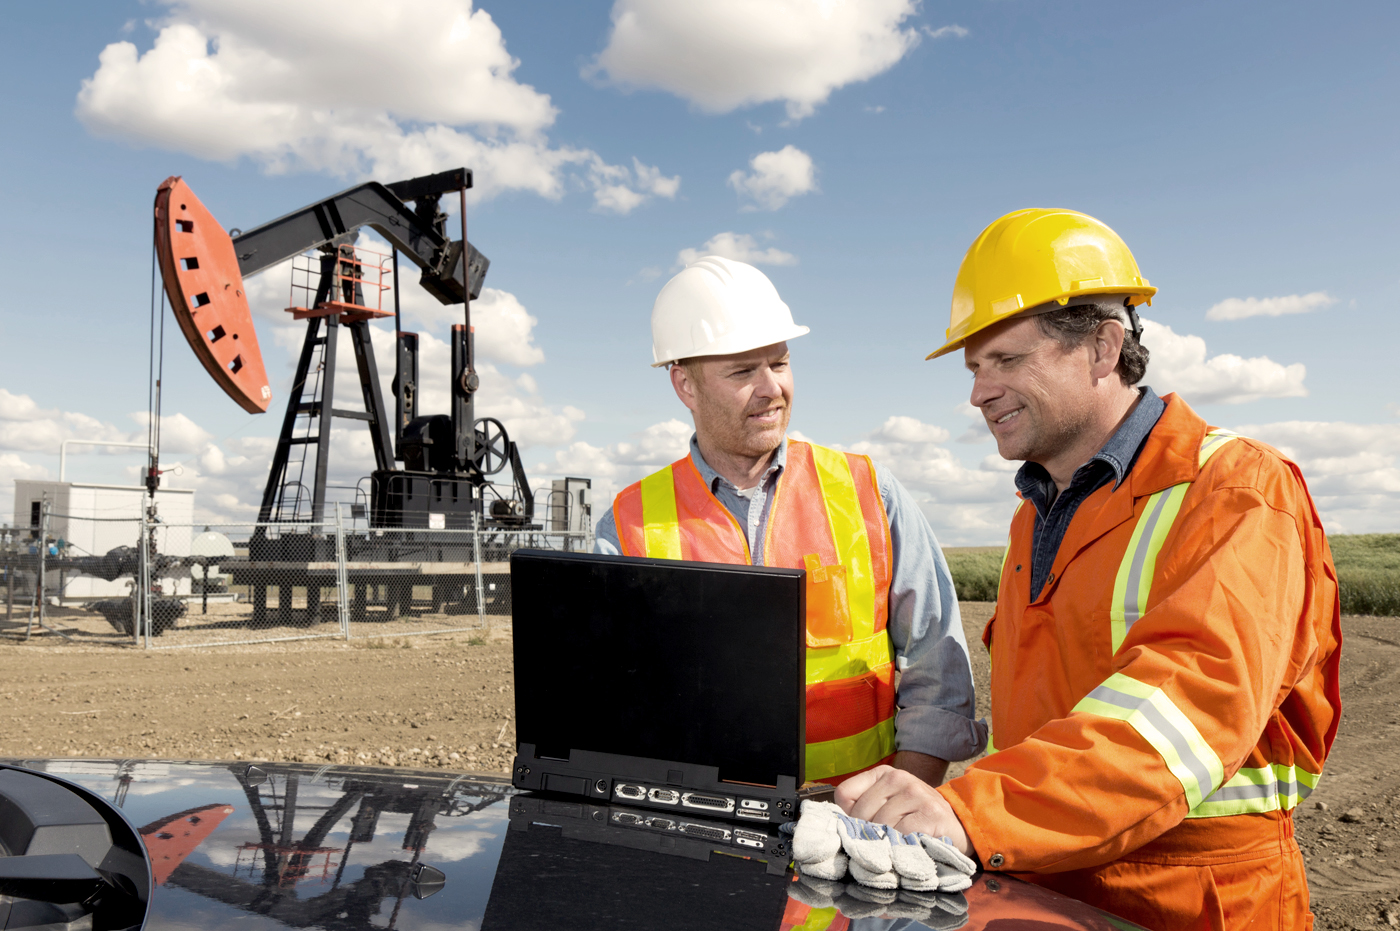 Two men in hard hats and safety vests working on a laptop at a drilling site.